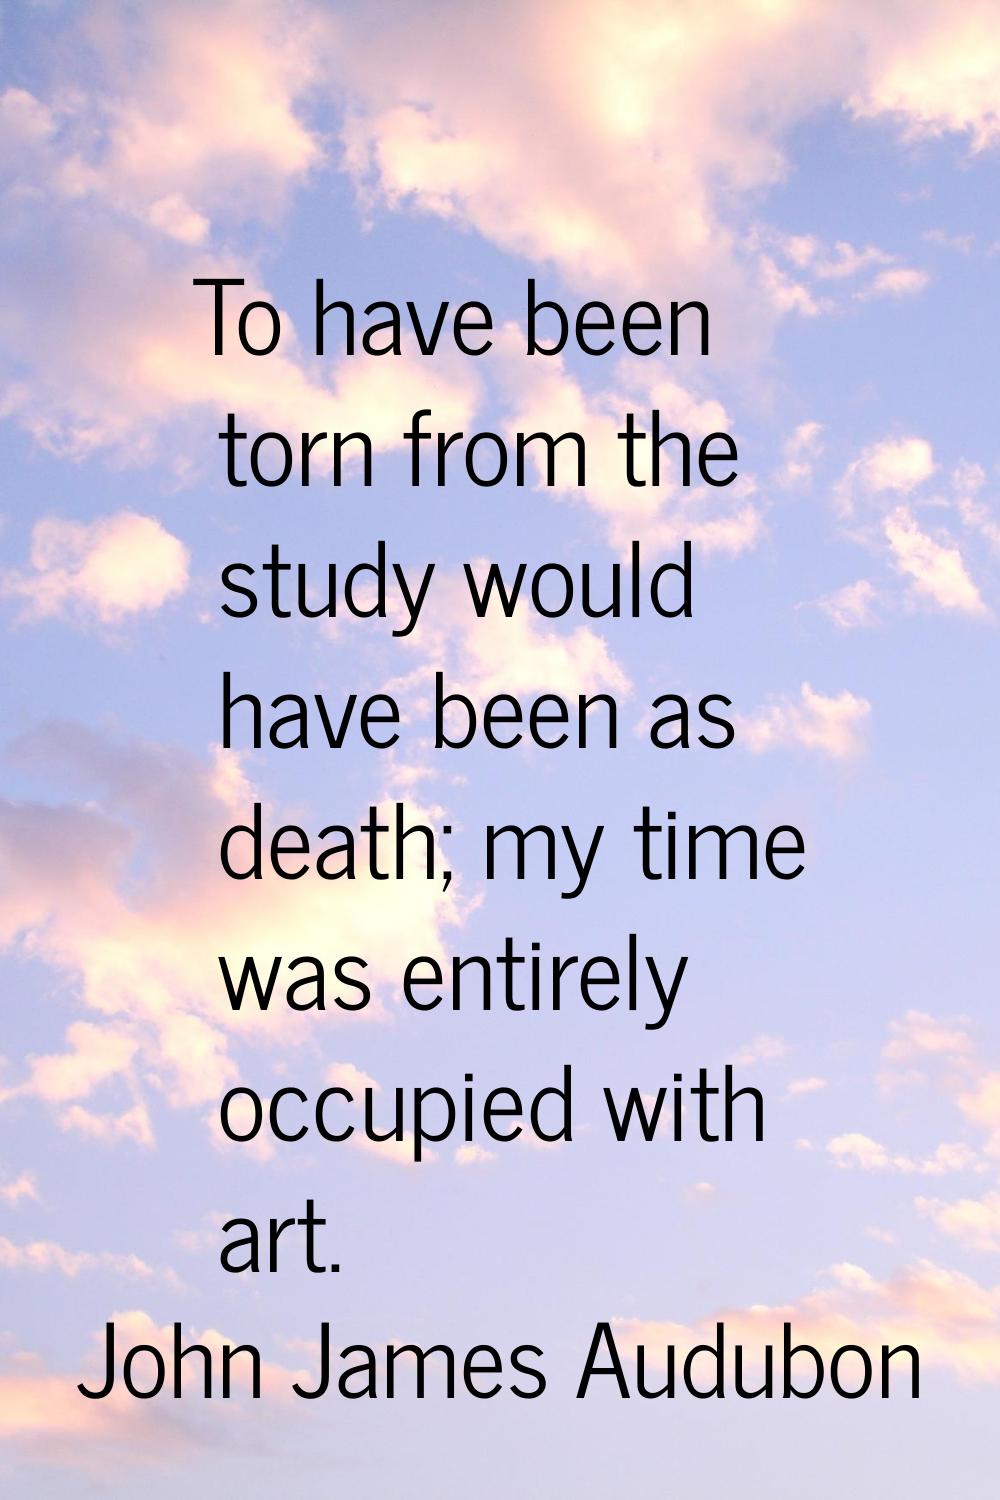 To have been torn from the study would have been as death; my time was entirely occupied with art.